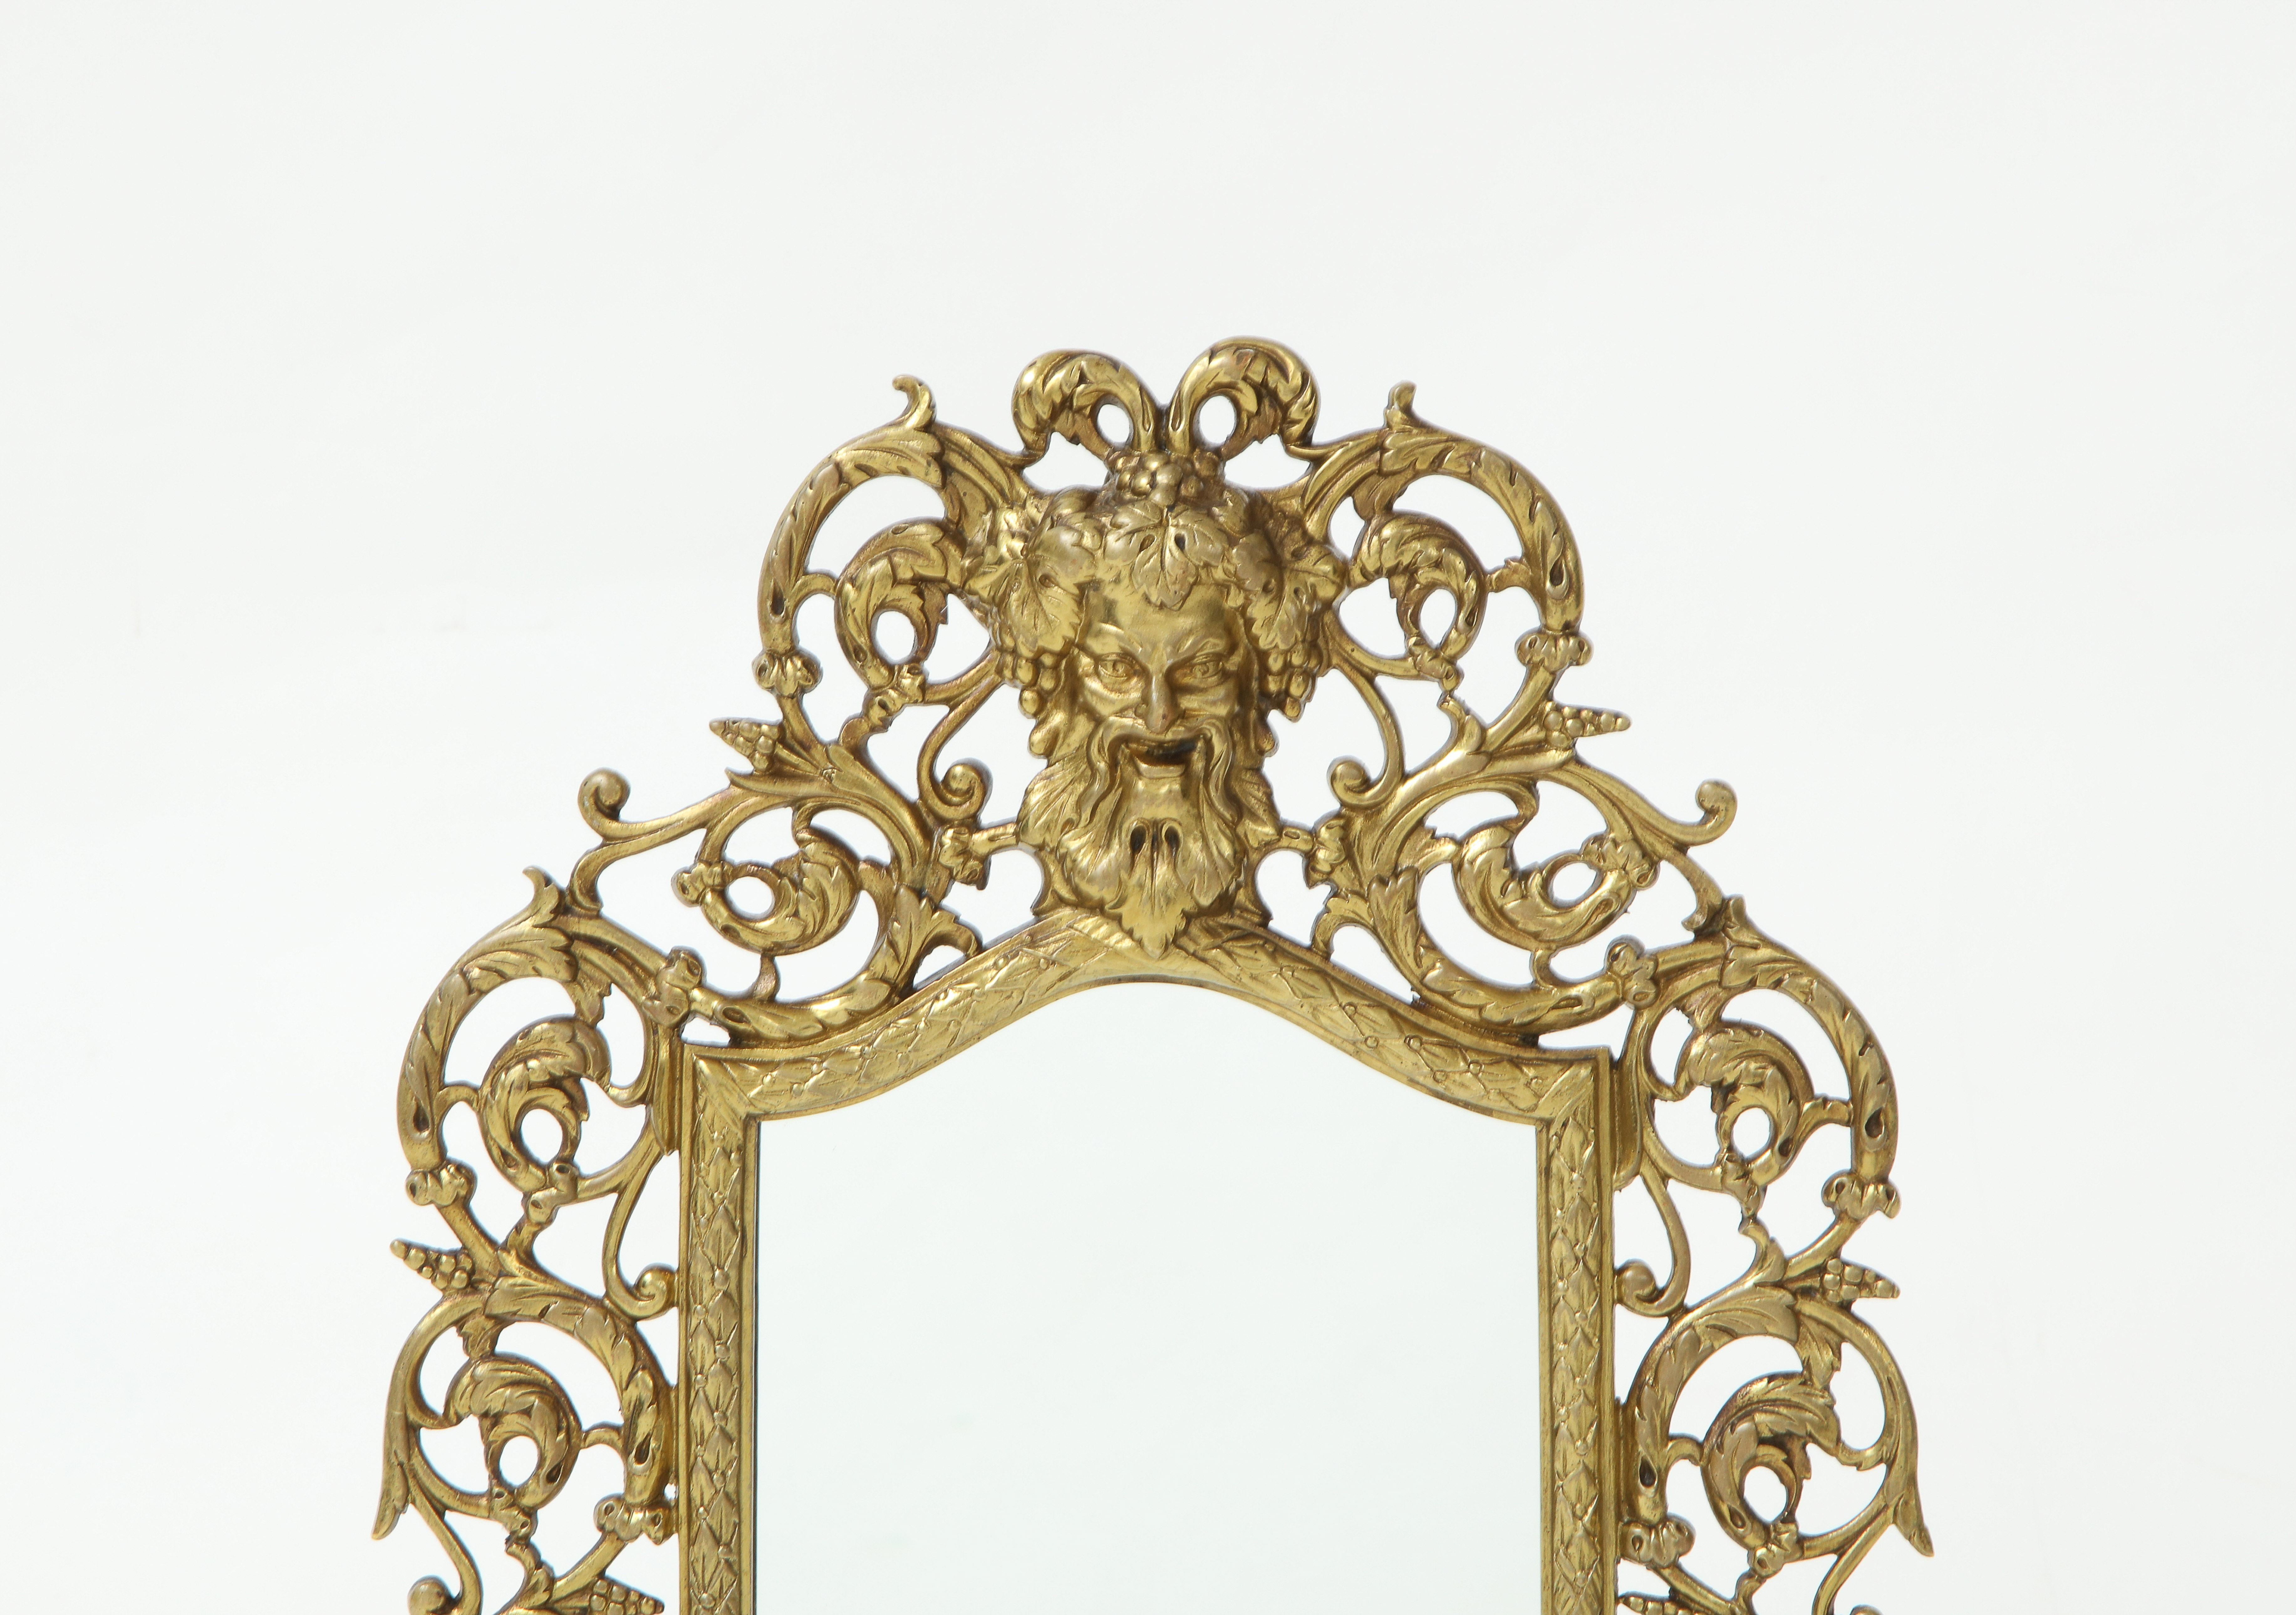 1890's P.E. Guerin N.Y. antique brass wall or vanity mirror, in vintage original condition with minor wear and patina to the brass due to age ans use.